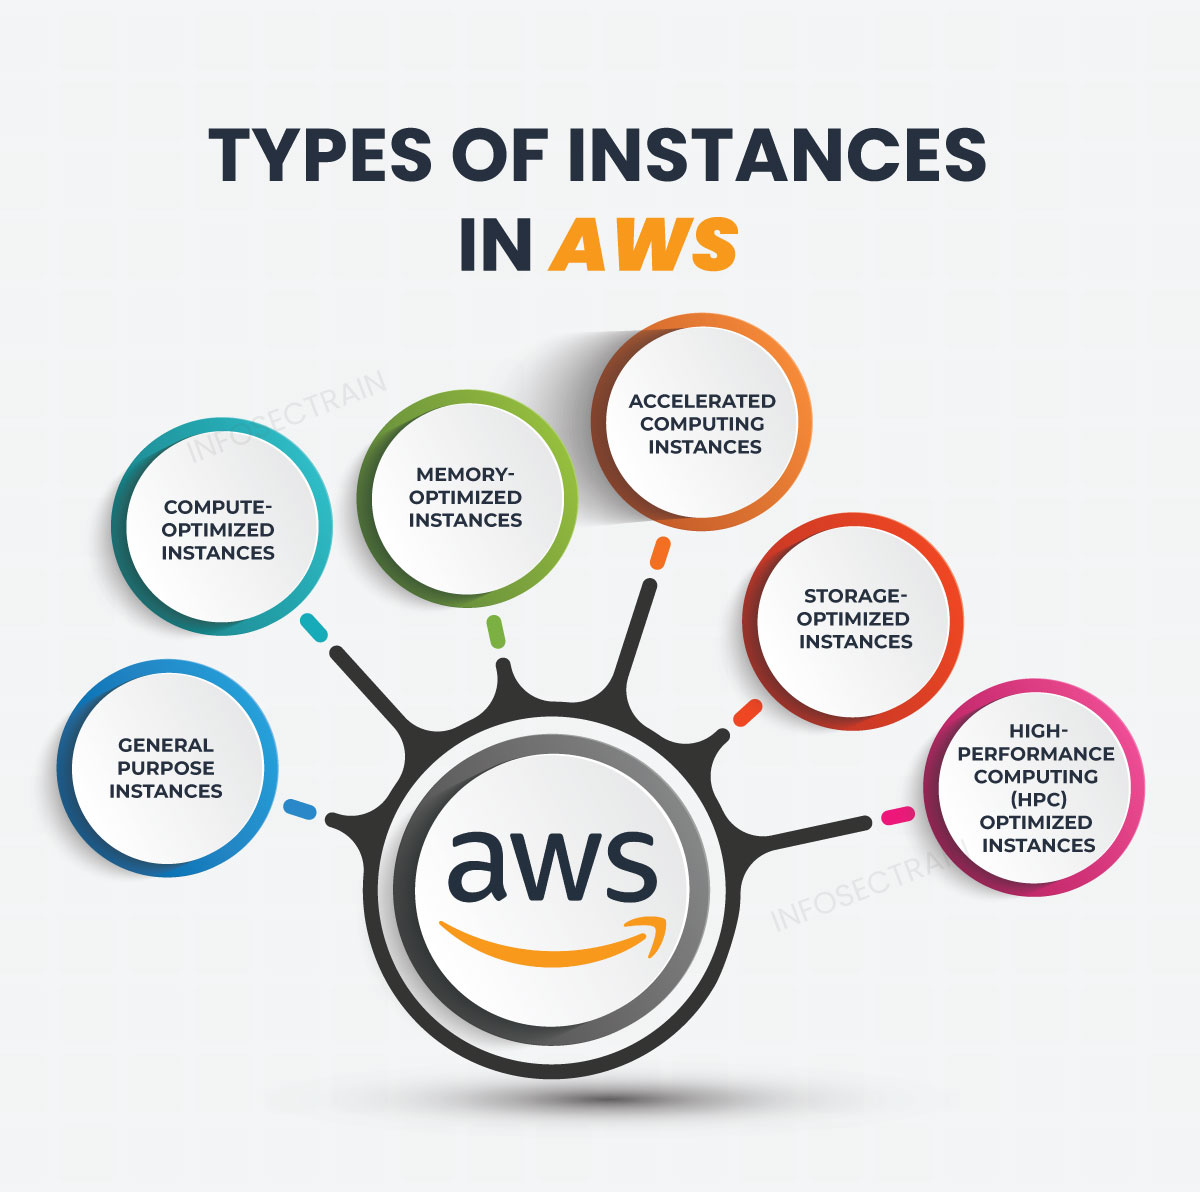 Types of Instances in AWS